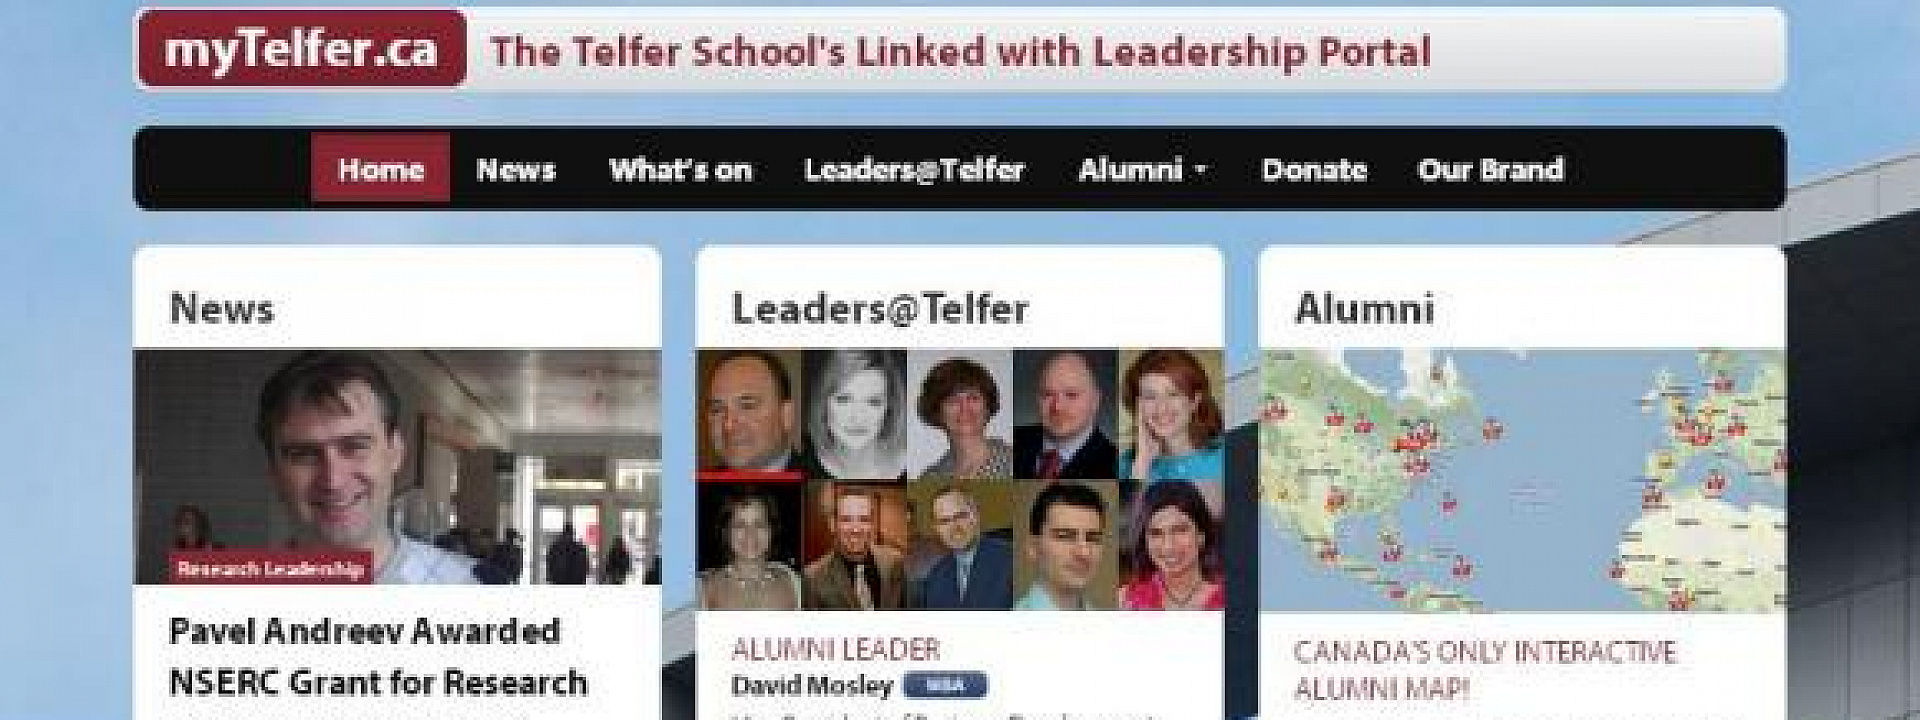 The "myTelfer.ca" Portal is Relaunched